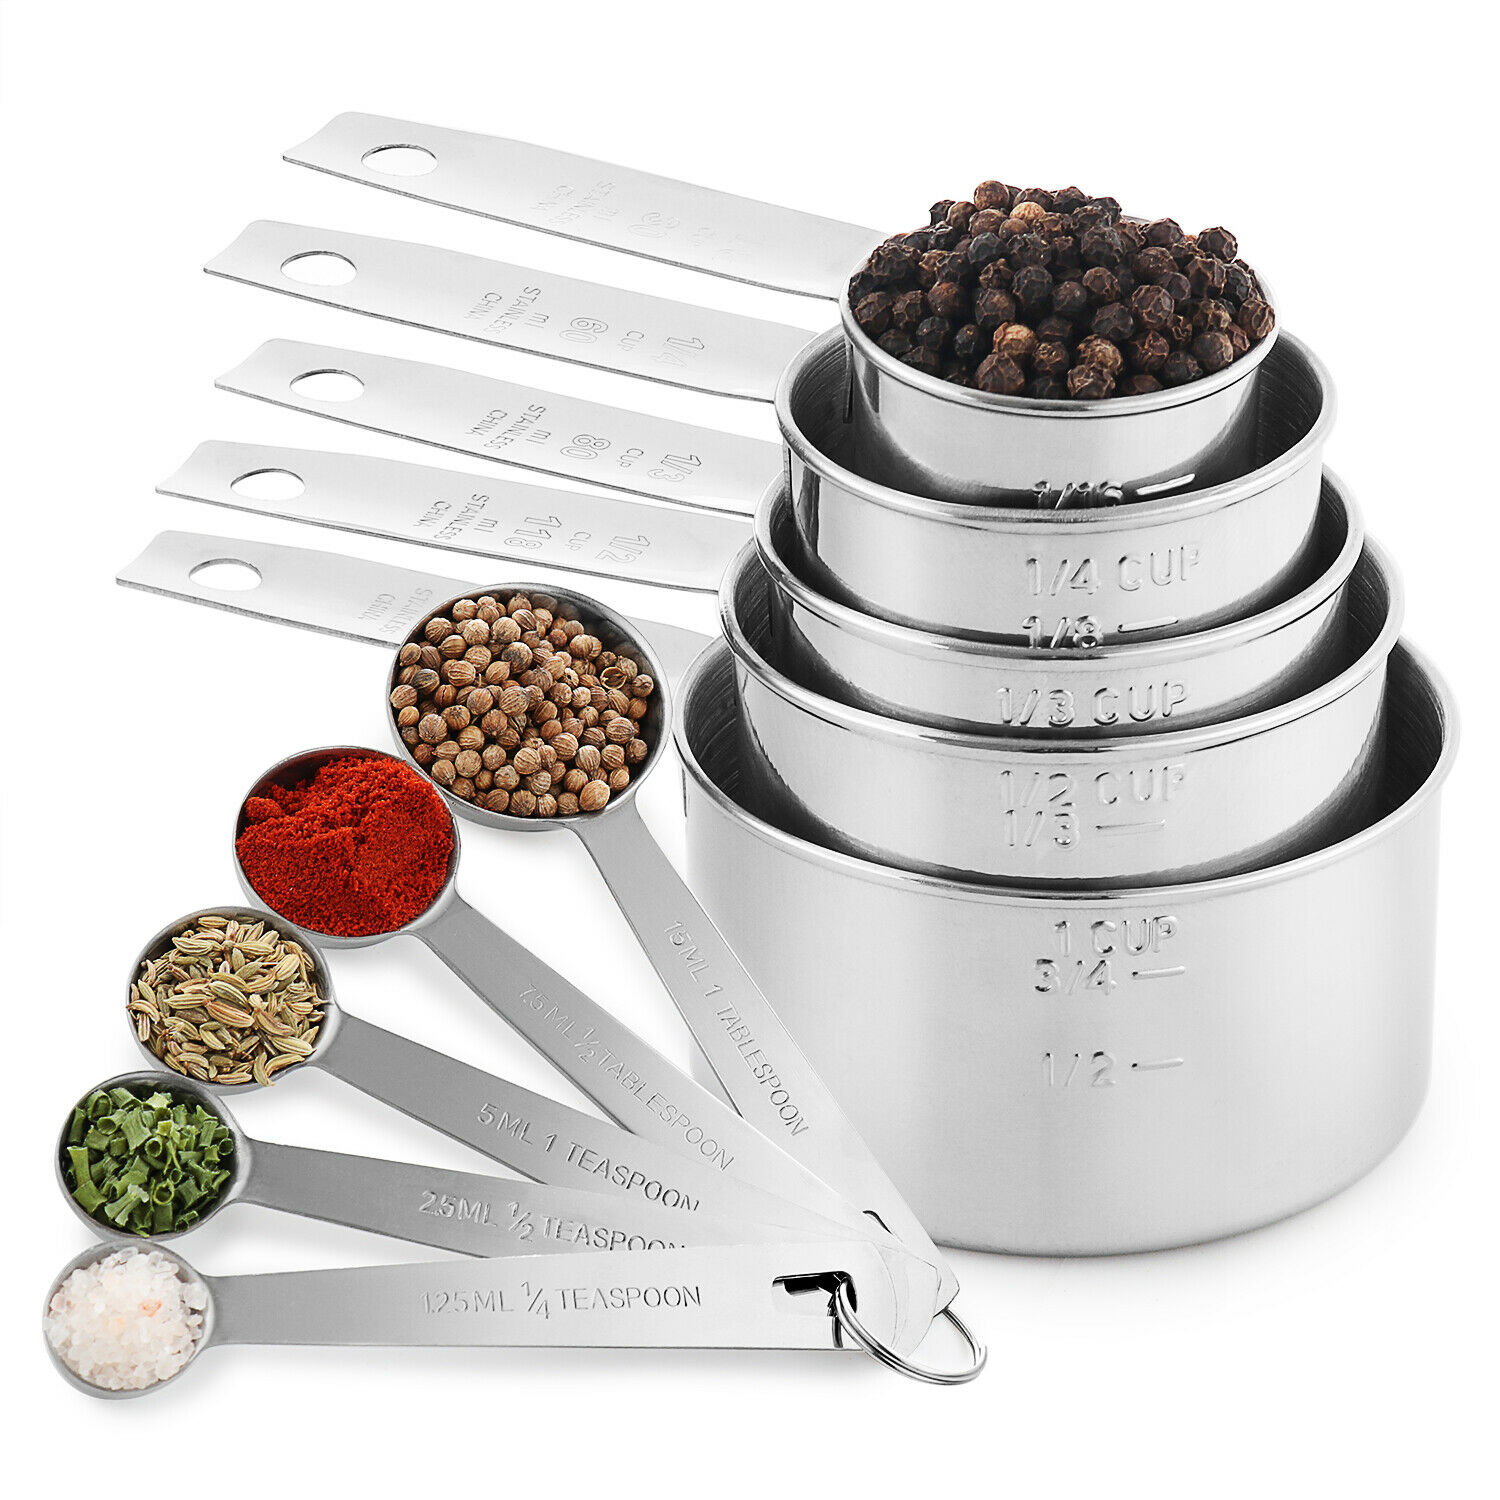 Stainless Steel Measuring Cups & Measuring Spoons 10-piece Set 5 Cups & 5 Spoons